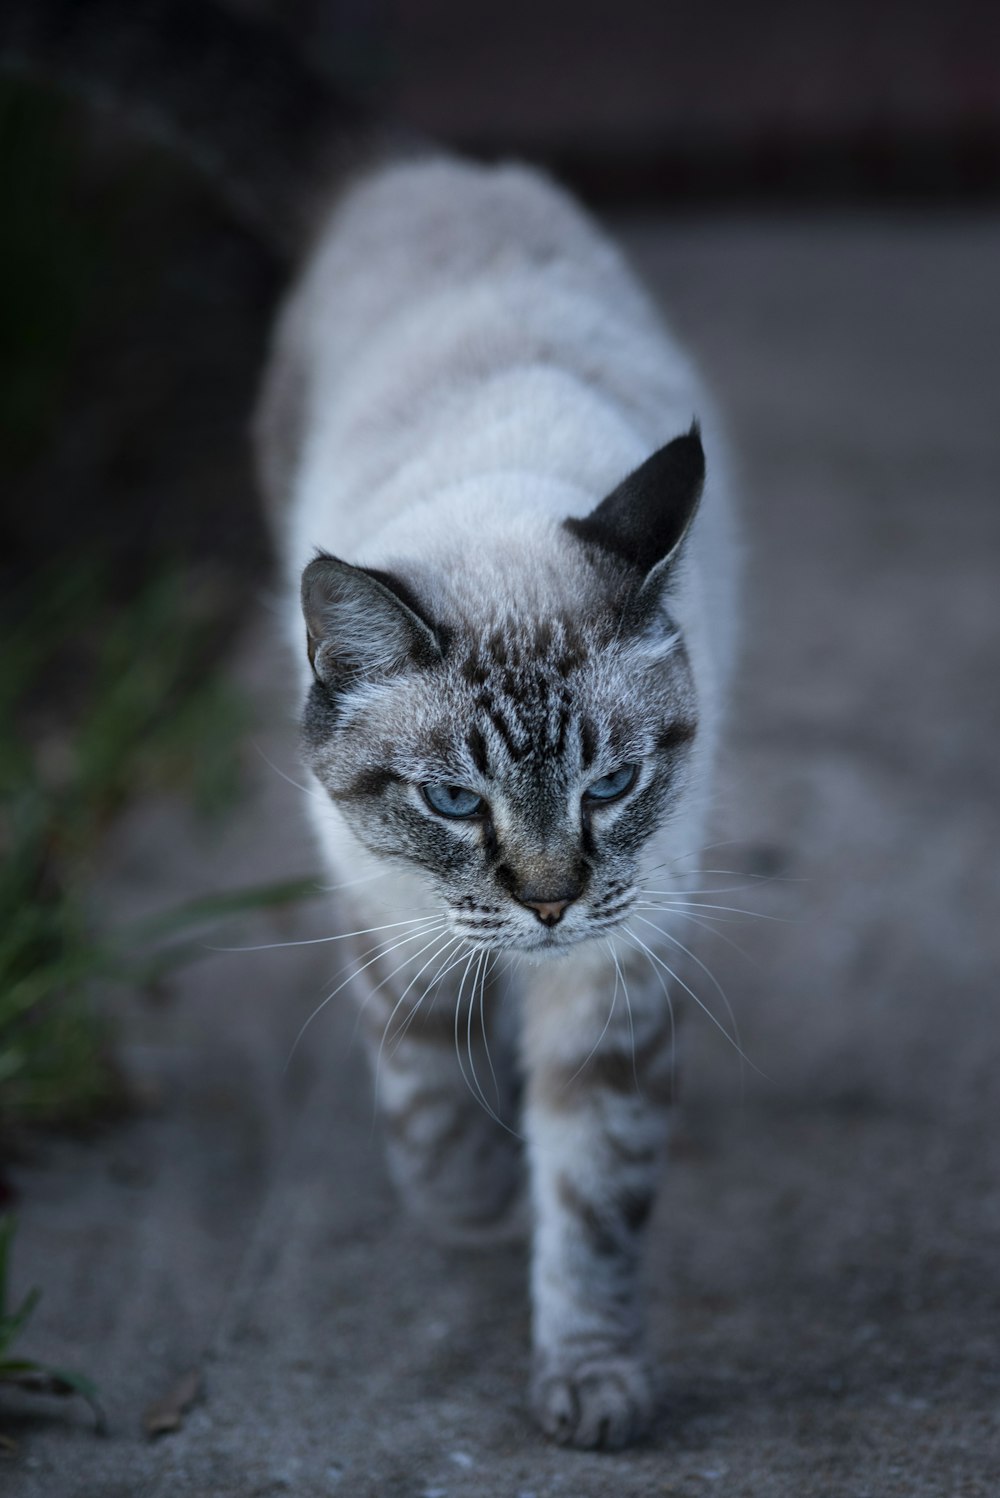 a gray and white cat walking across a cement ground